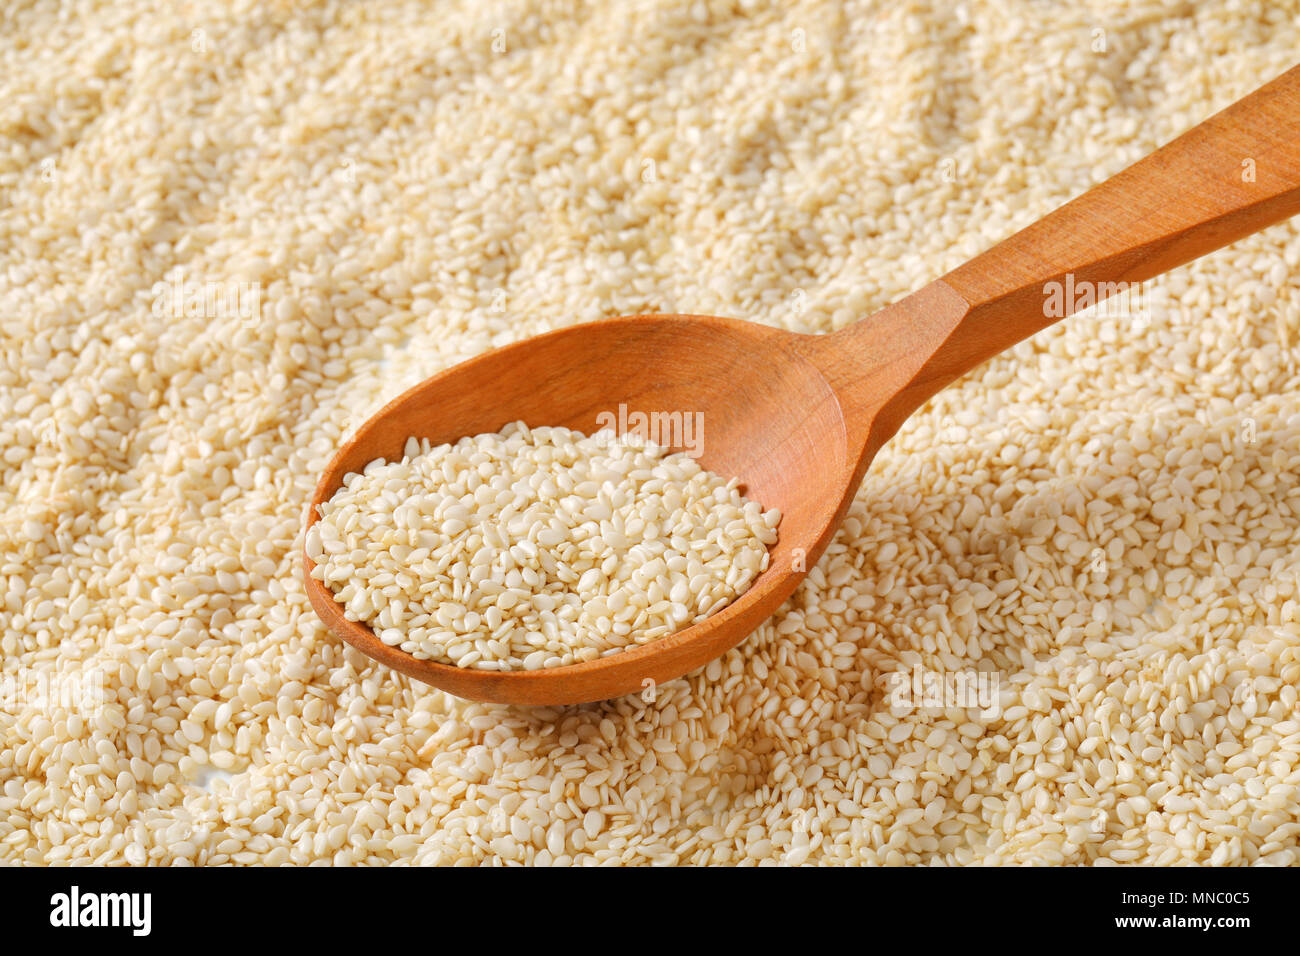 spoon of healthy sesame seeds on sesame seeds background Stock Photo